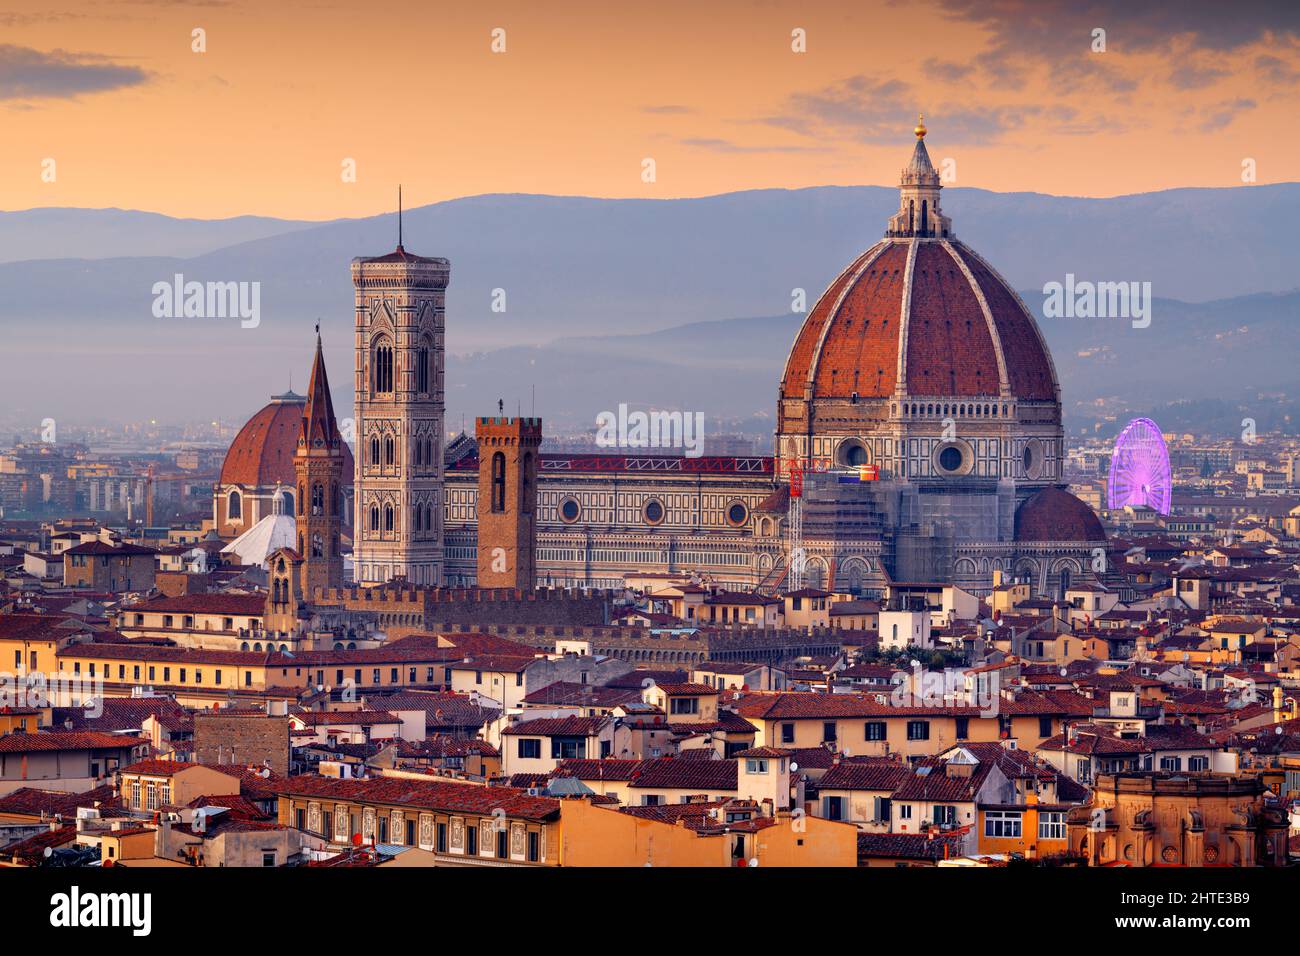 Florence, Italy skyline with landmark buildings at dusk over the Duomo. Stock Photo